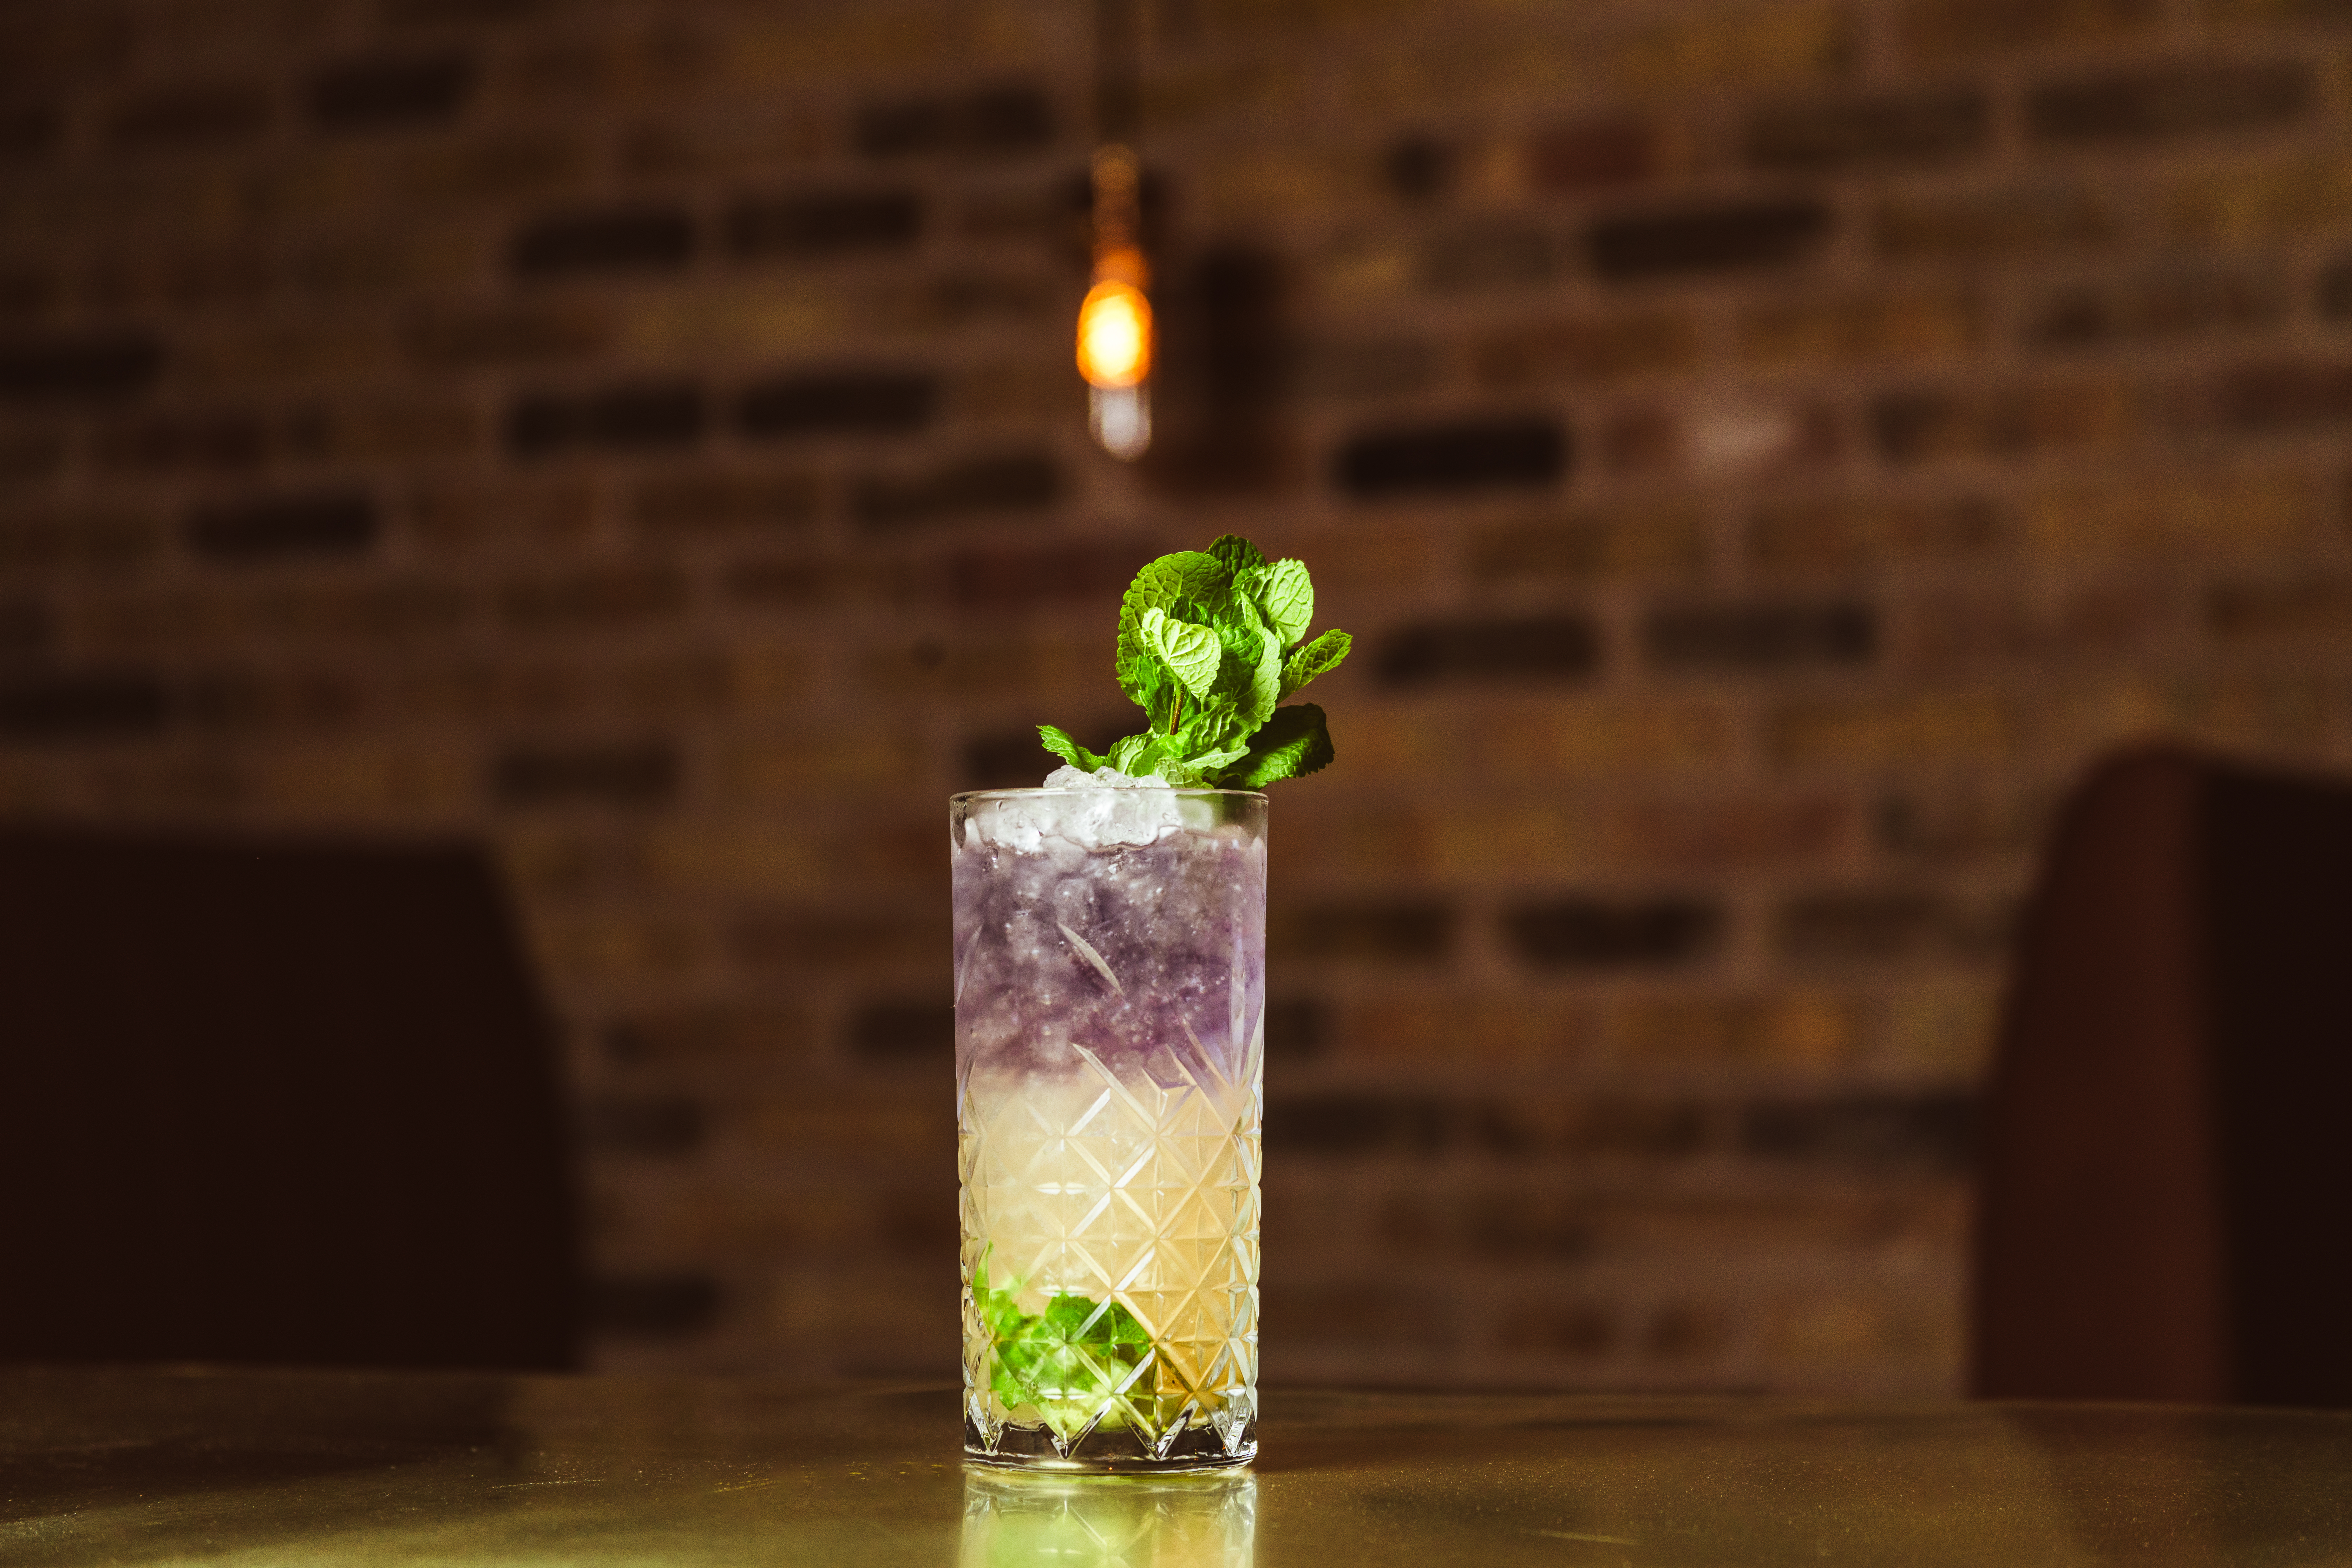 A cocktail with purple and yellow liquid in a clear glass with ice and green herbs.